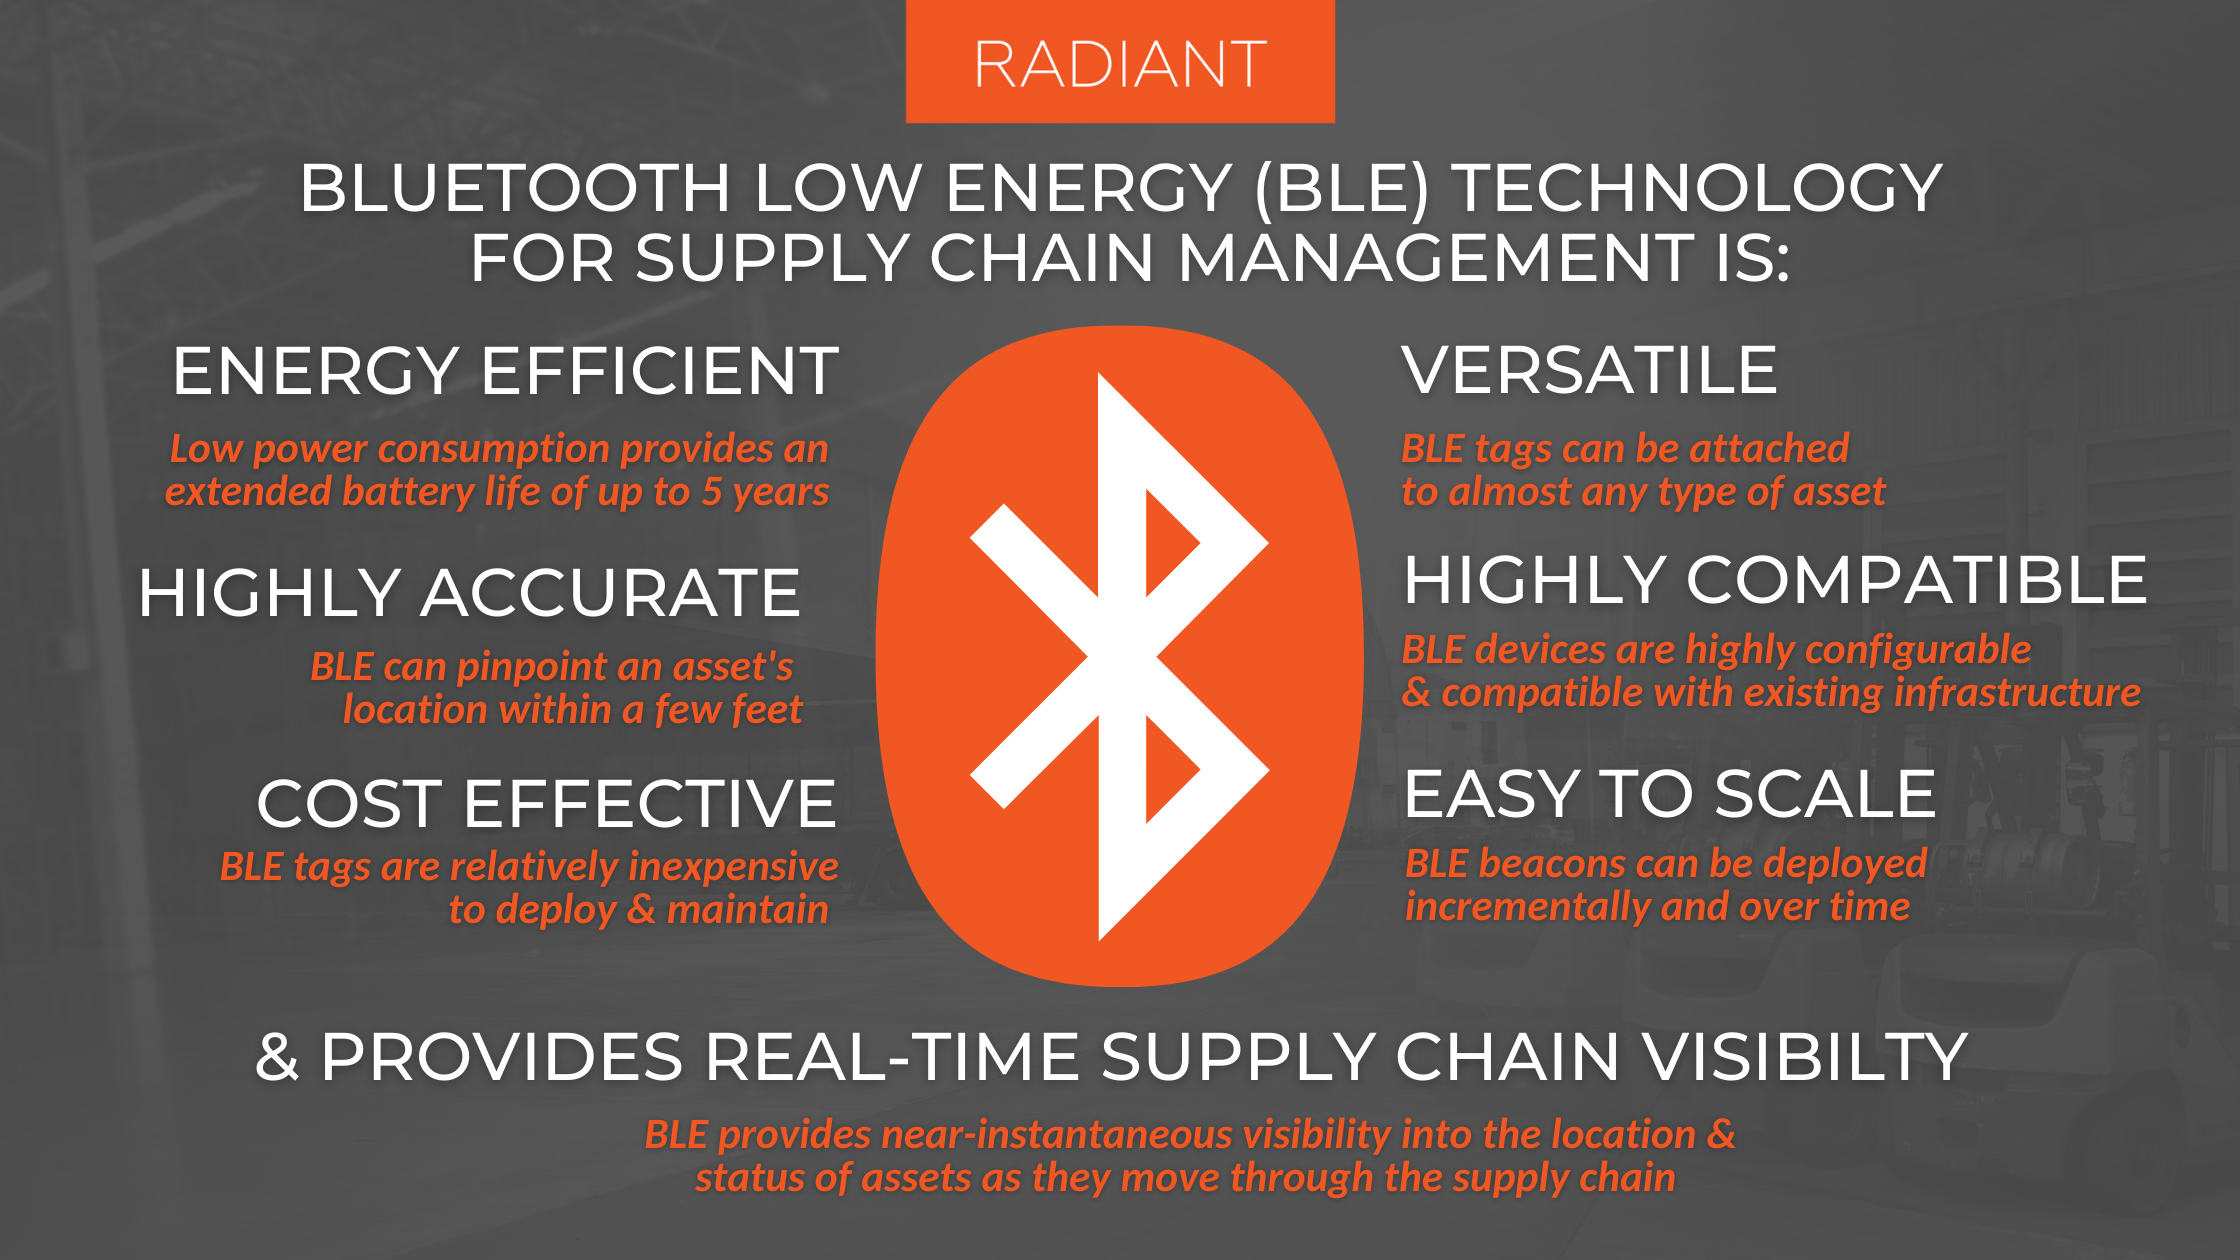 BLE Technology for Real Time Supply Chain Visibility - Improving Supply Chain Visibility with BLE Technology - Supply Chain Visibility Software - Supply Chain Visibility Companies - Real Time Supply Chain Visibility With BLE Technology - BLE Tags